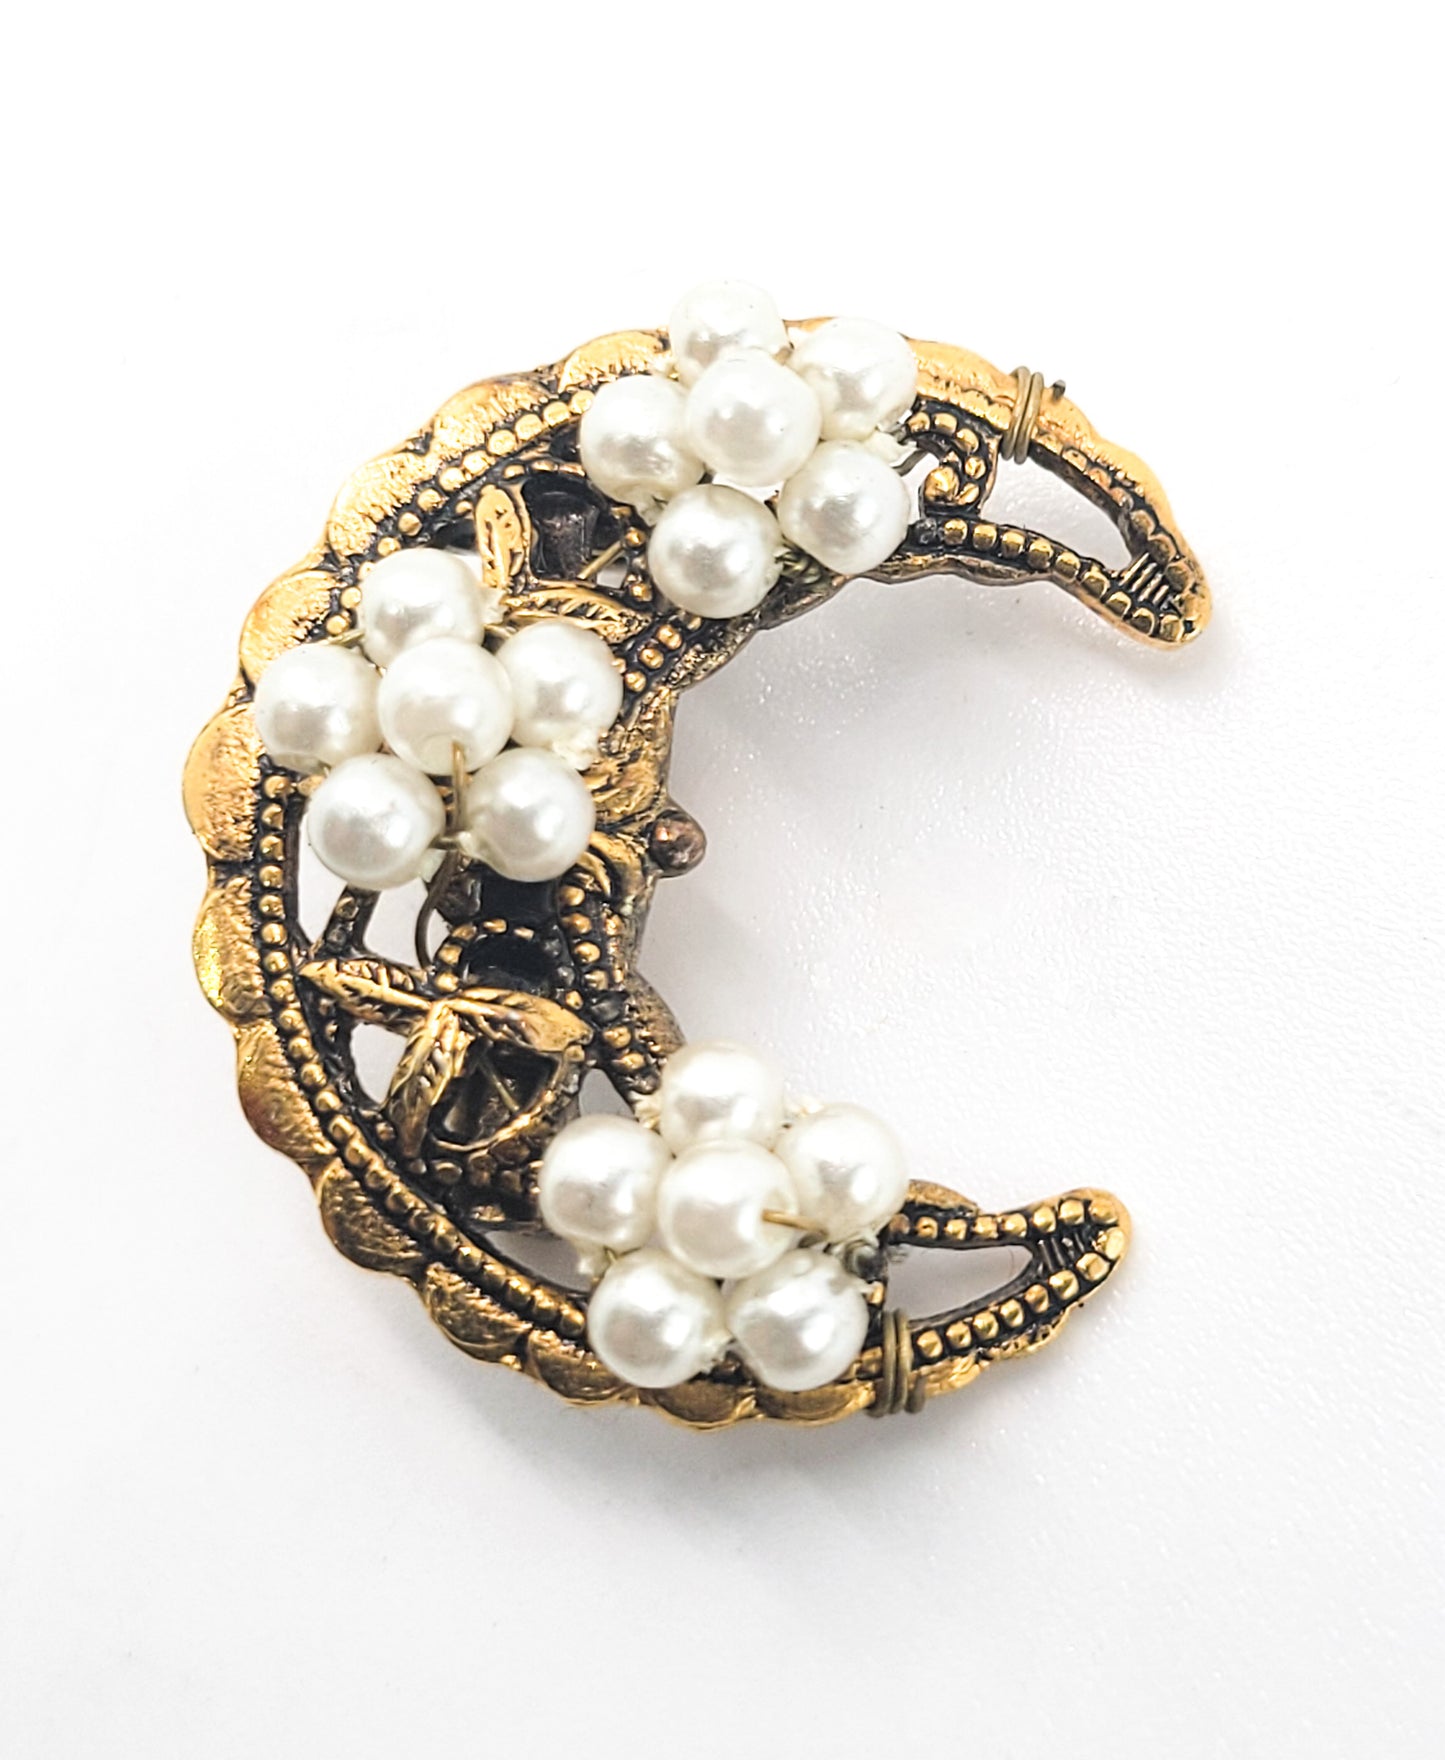 Crescent moon gold toned vintage brooch with beaded white flower accents